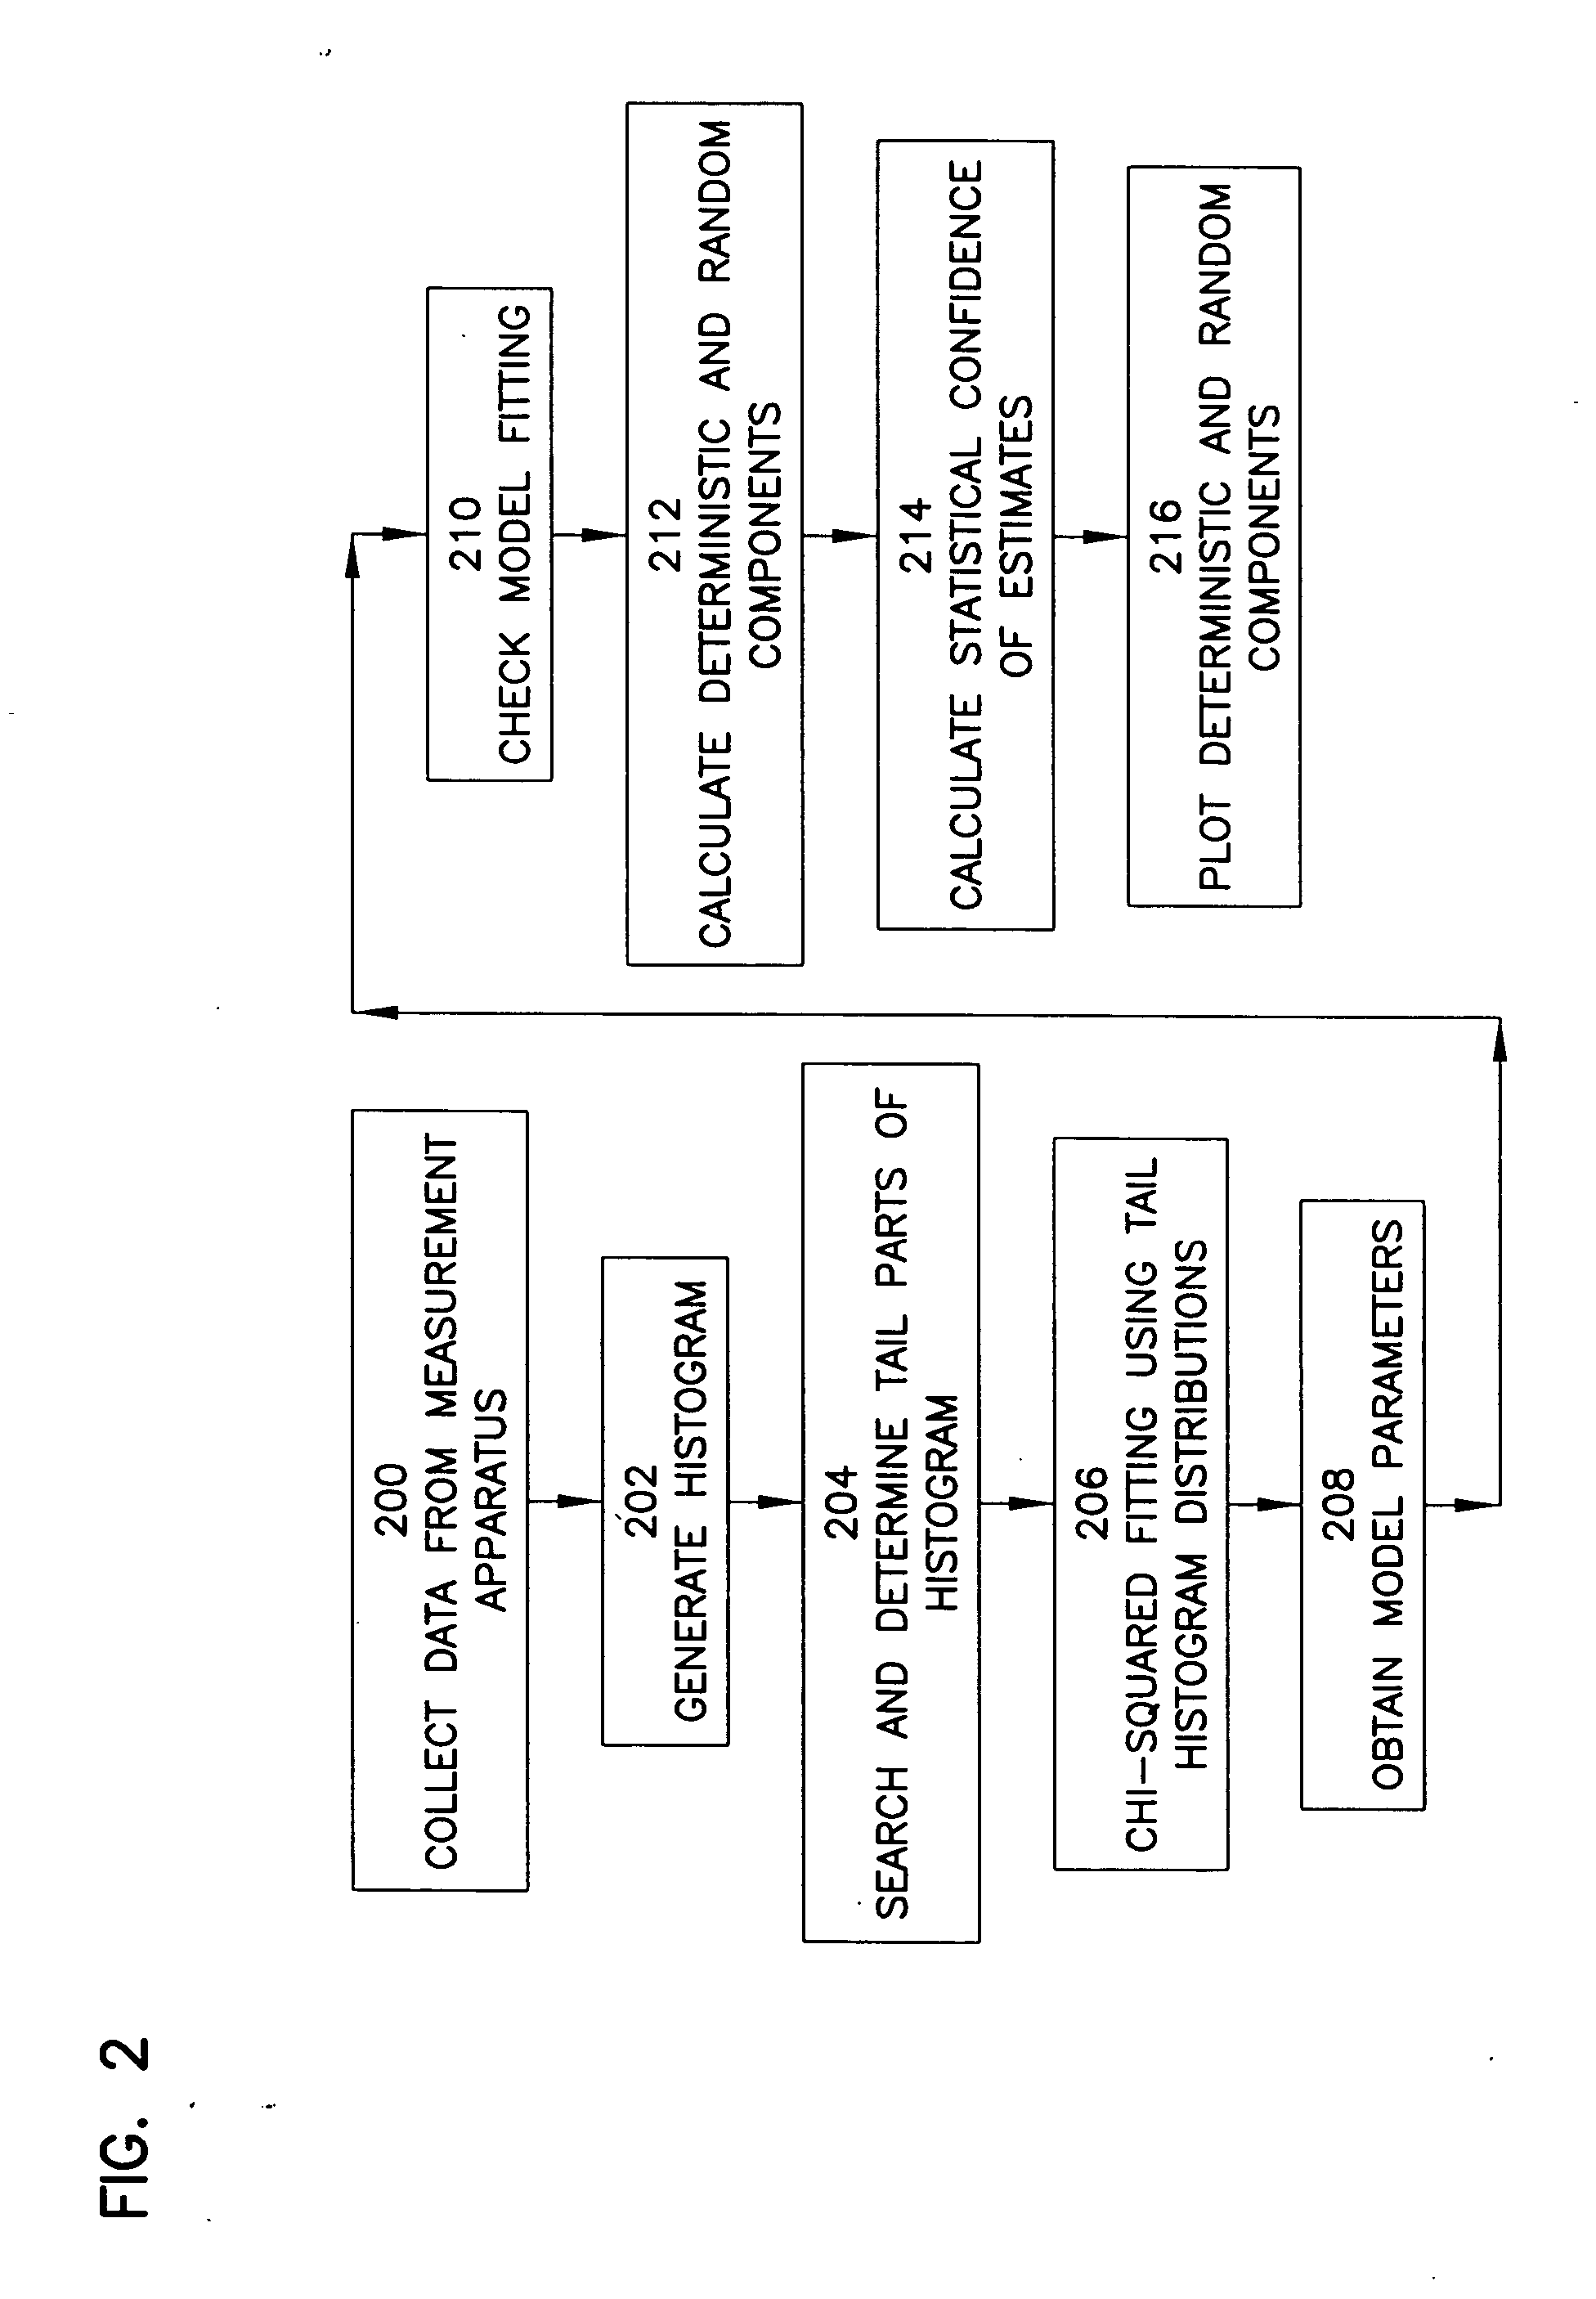 Method and apparatus for analyzing measurements